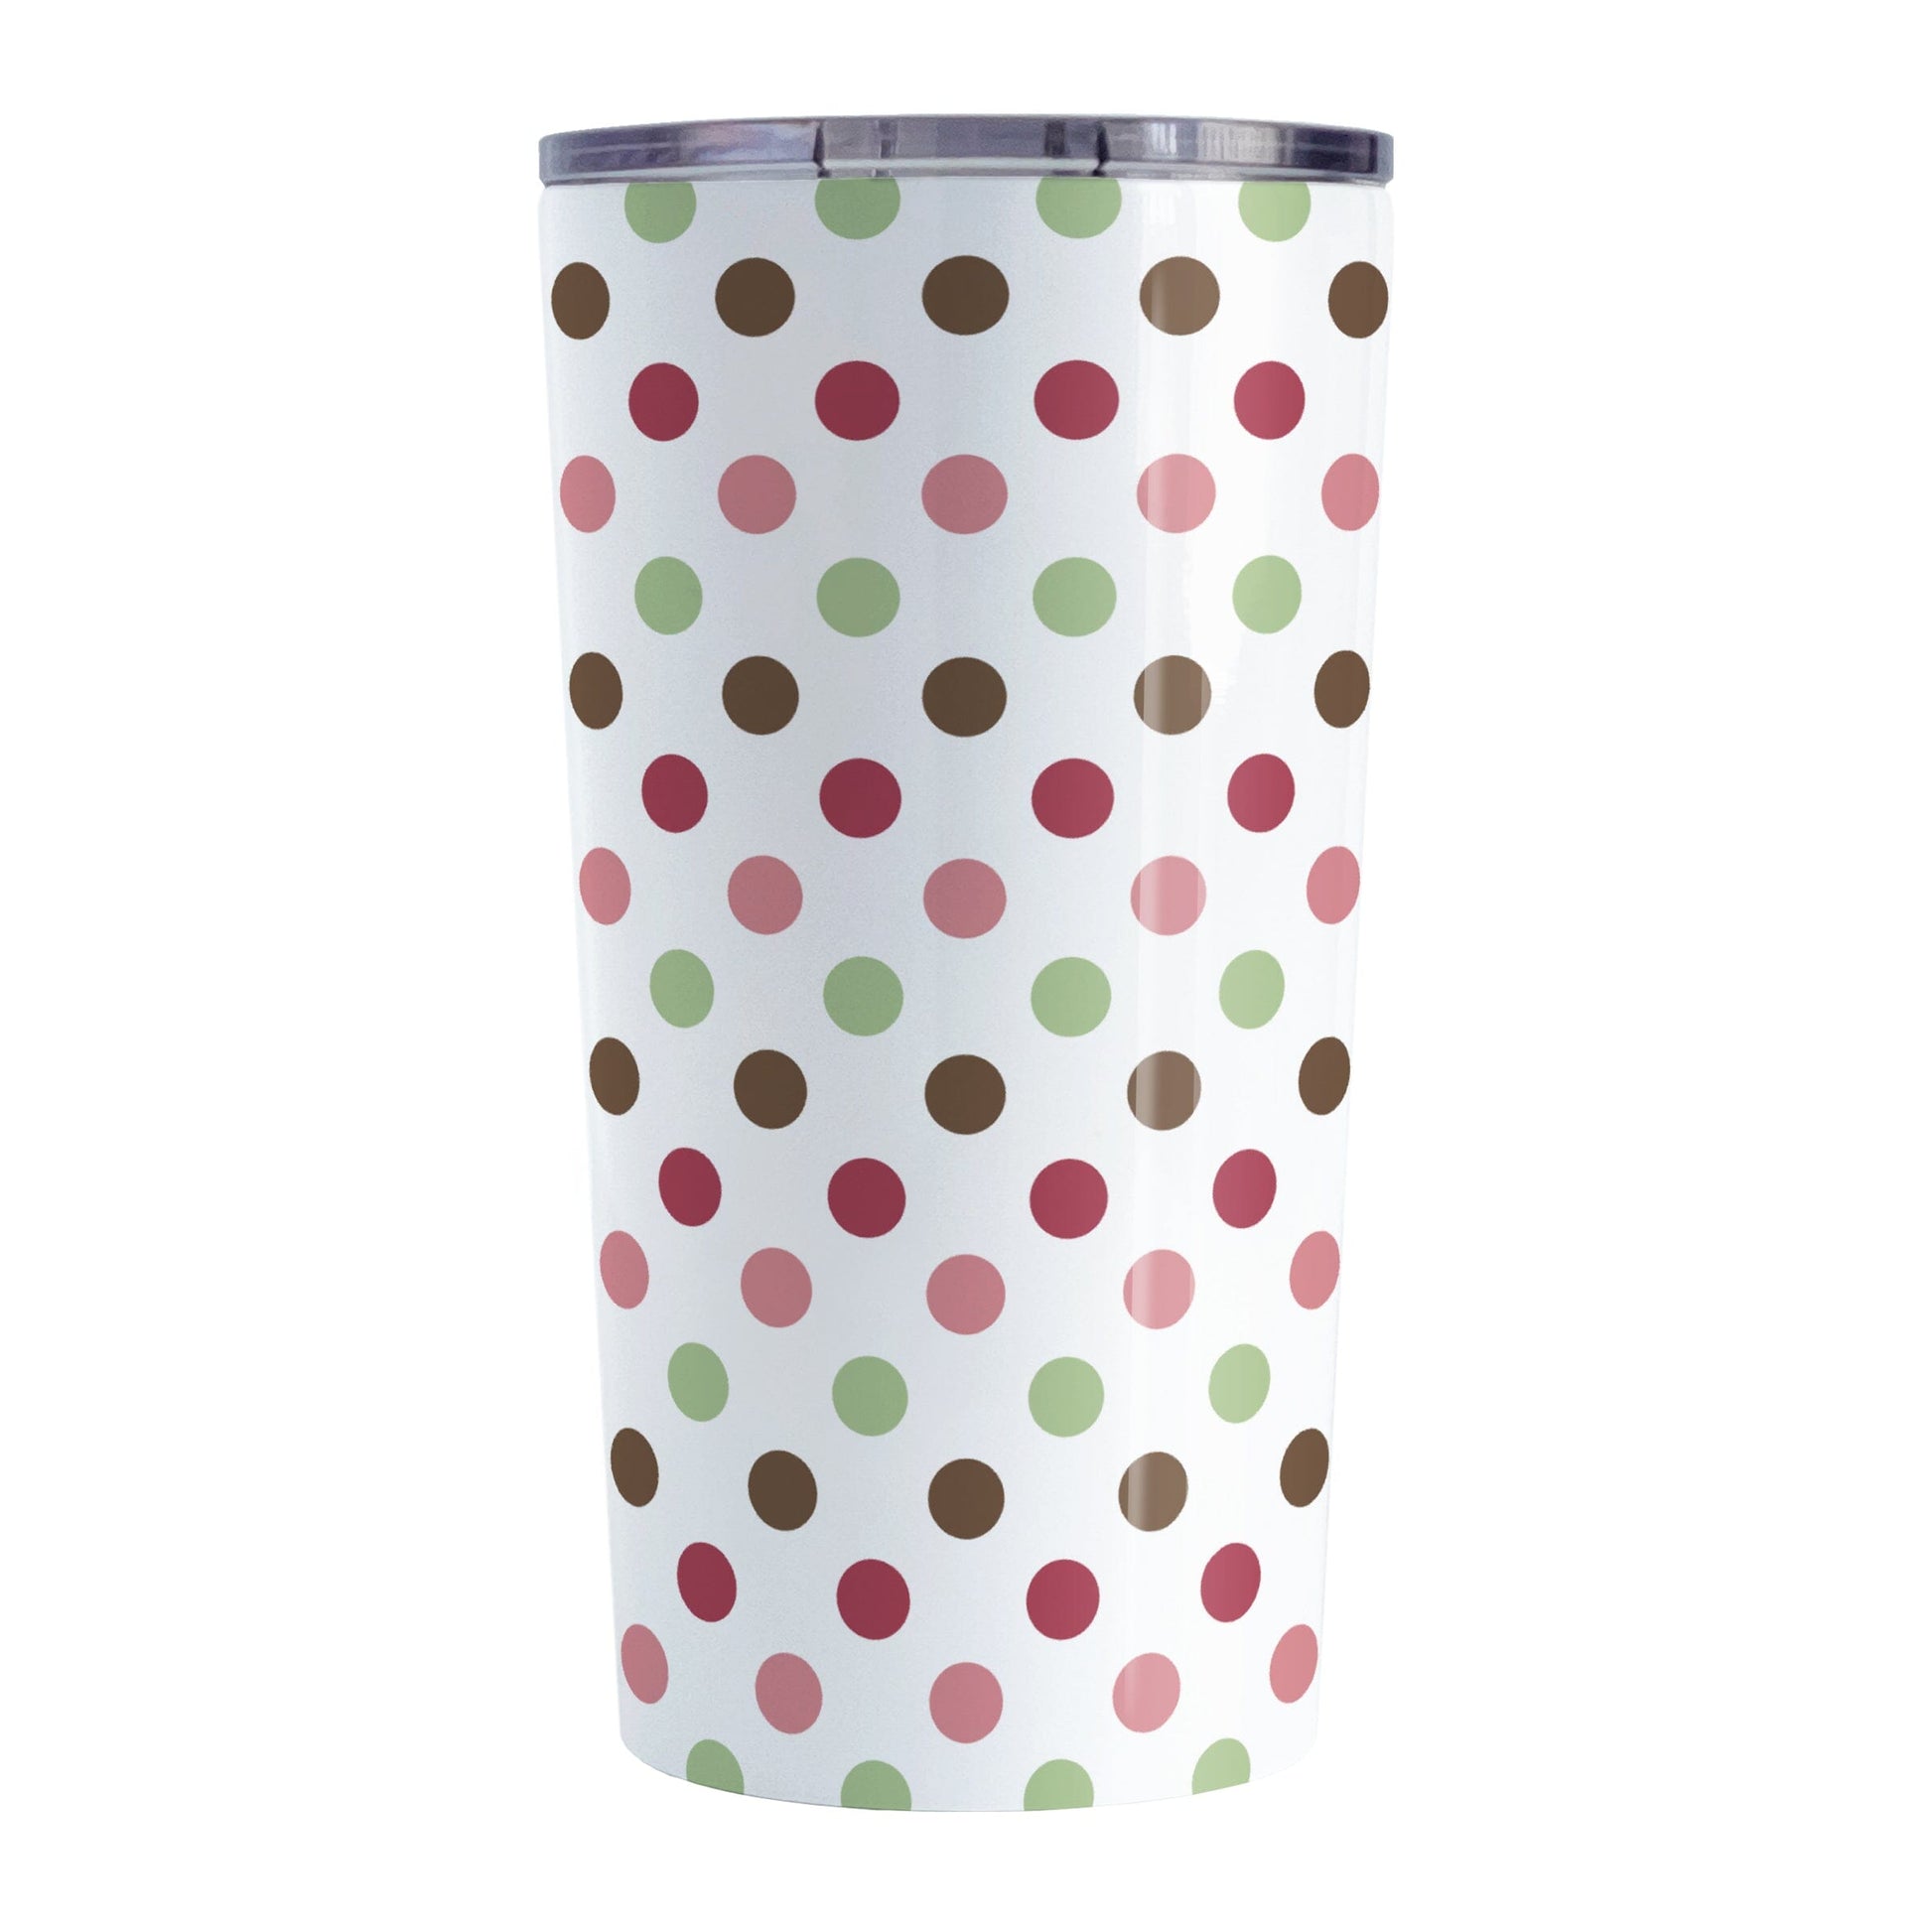 Berry Green Polka Dots Tumbler Cup (20oz) at Amy's Coffee Mugs. A stainless steel tumbler cup designed with a pattern of polka dots a color palette of berry pink hues, sage green, and brown that wraps around the cup.